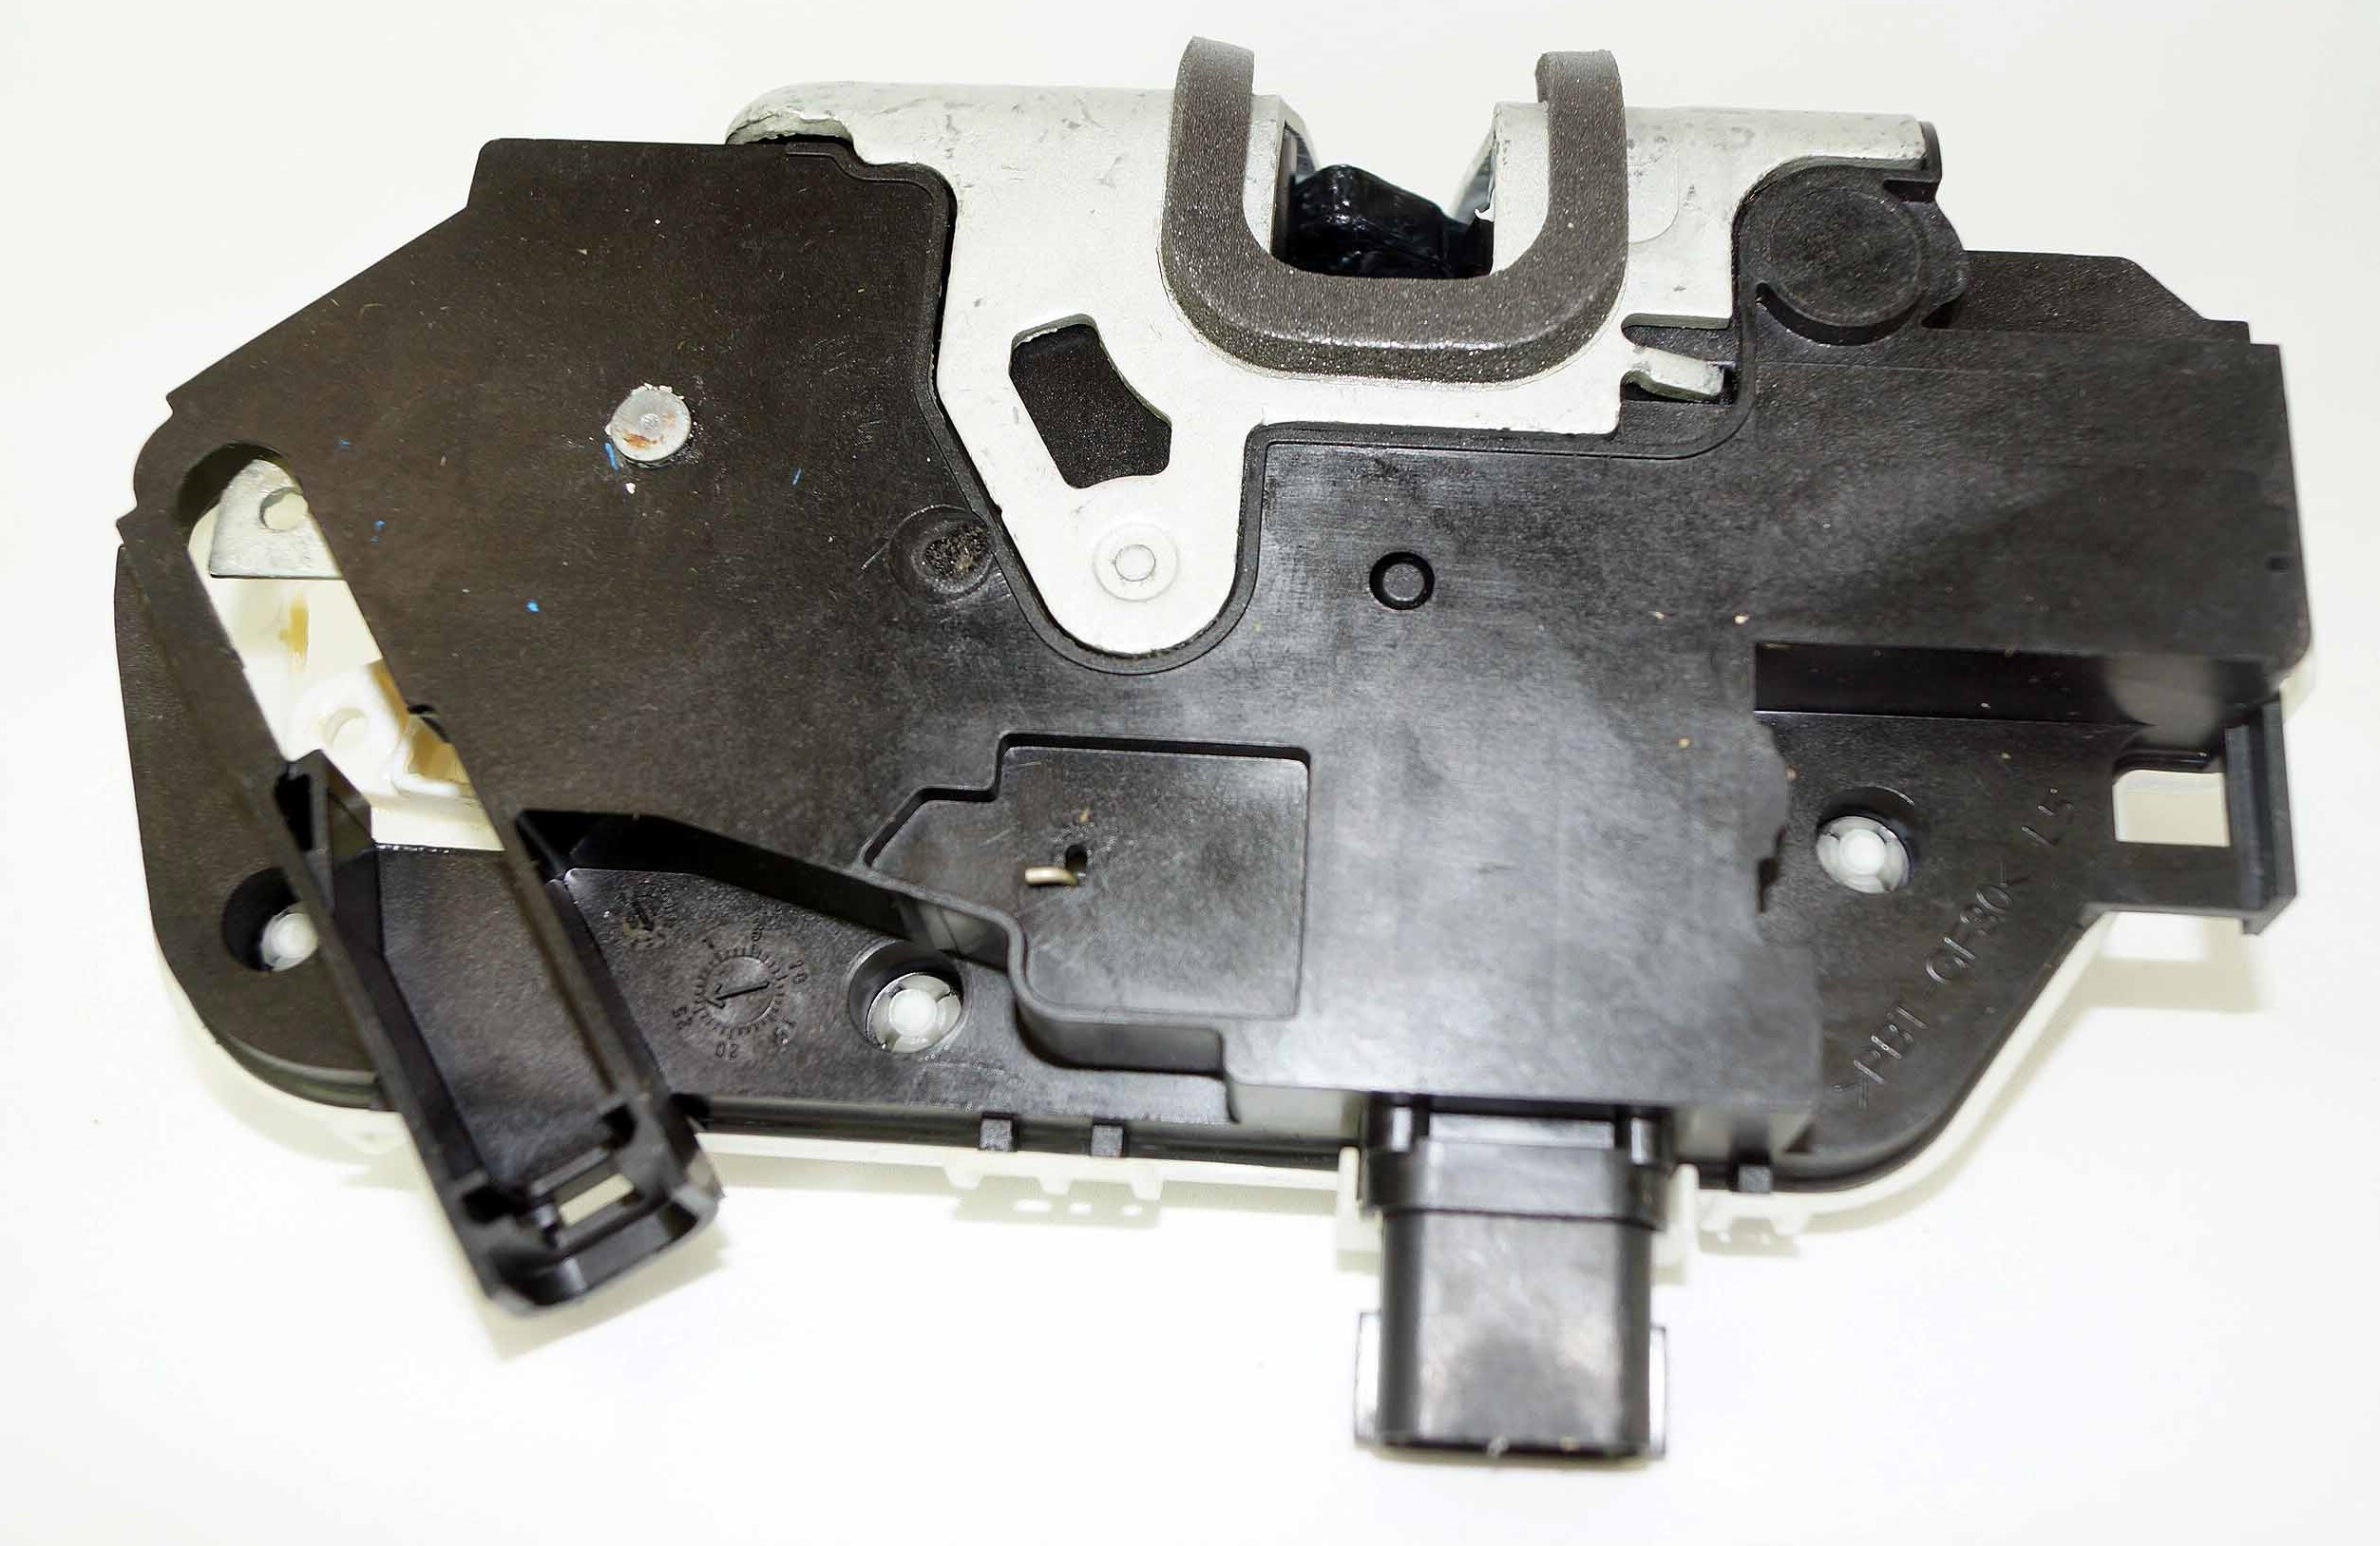 Genuine OEM AS4Z74219A65A Ford Door Lock Actuator Latch Front Left Driver LH - image 4